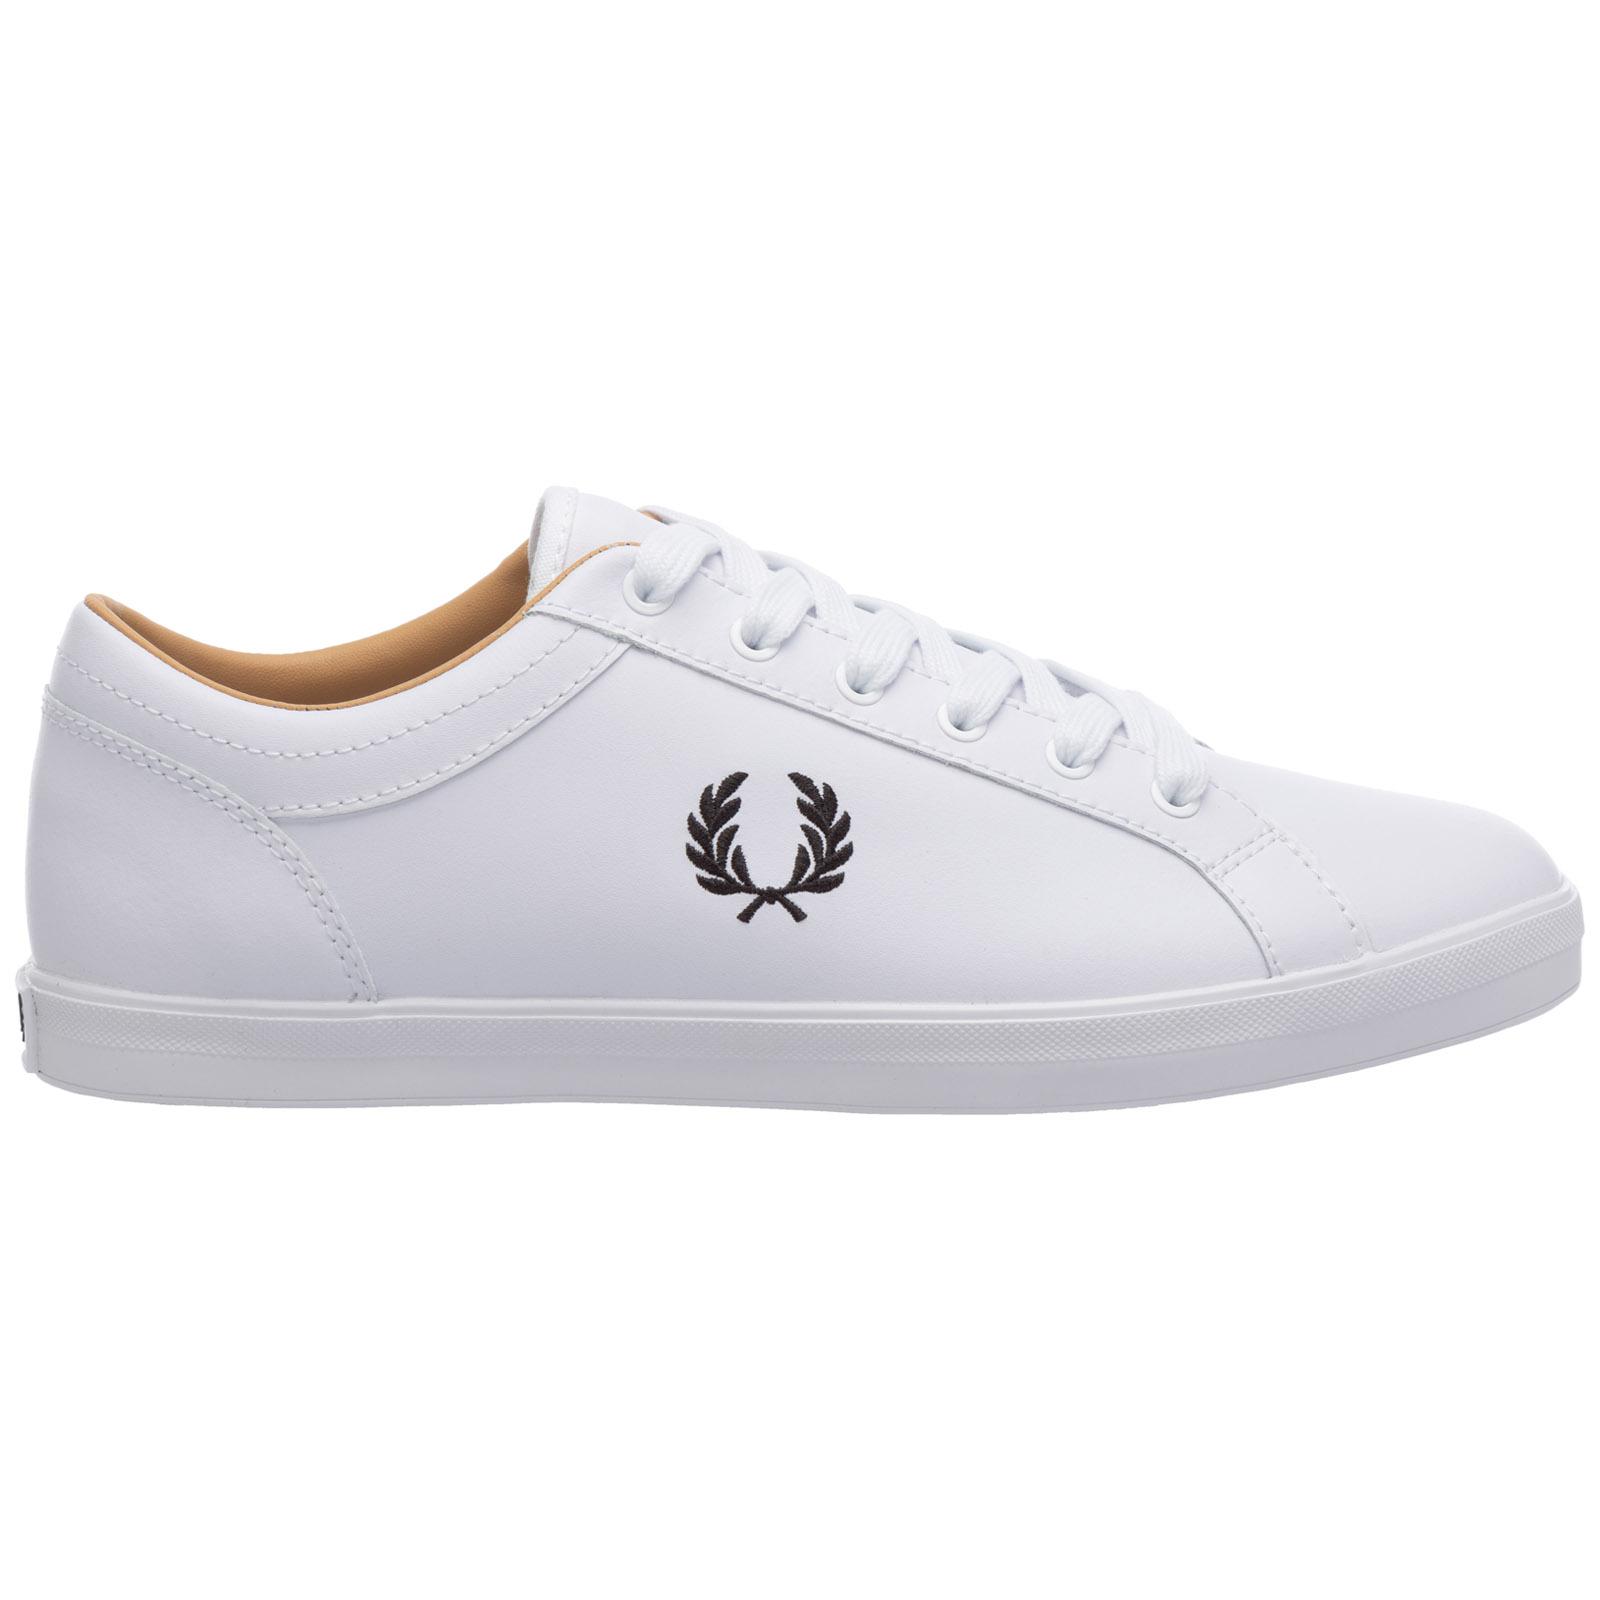 Fred Perry Men's Shoes Leather Trainers Sneakers Baseline